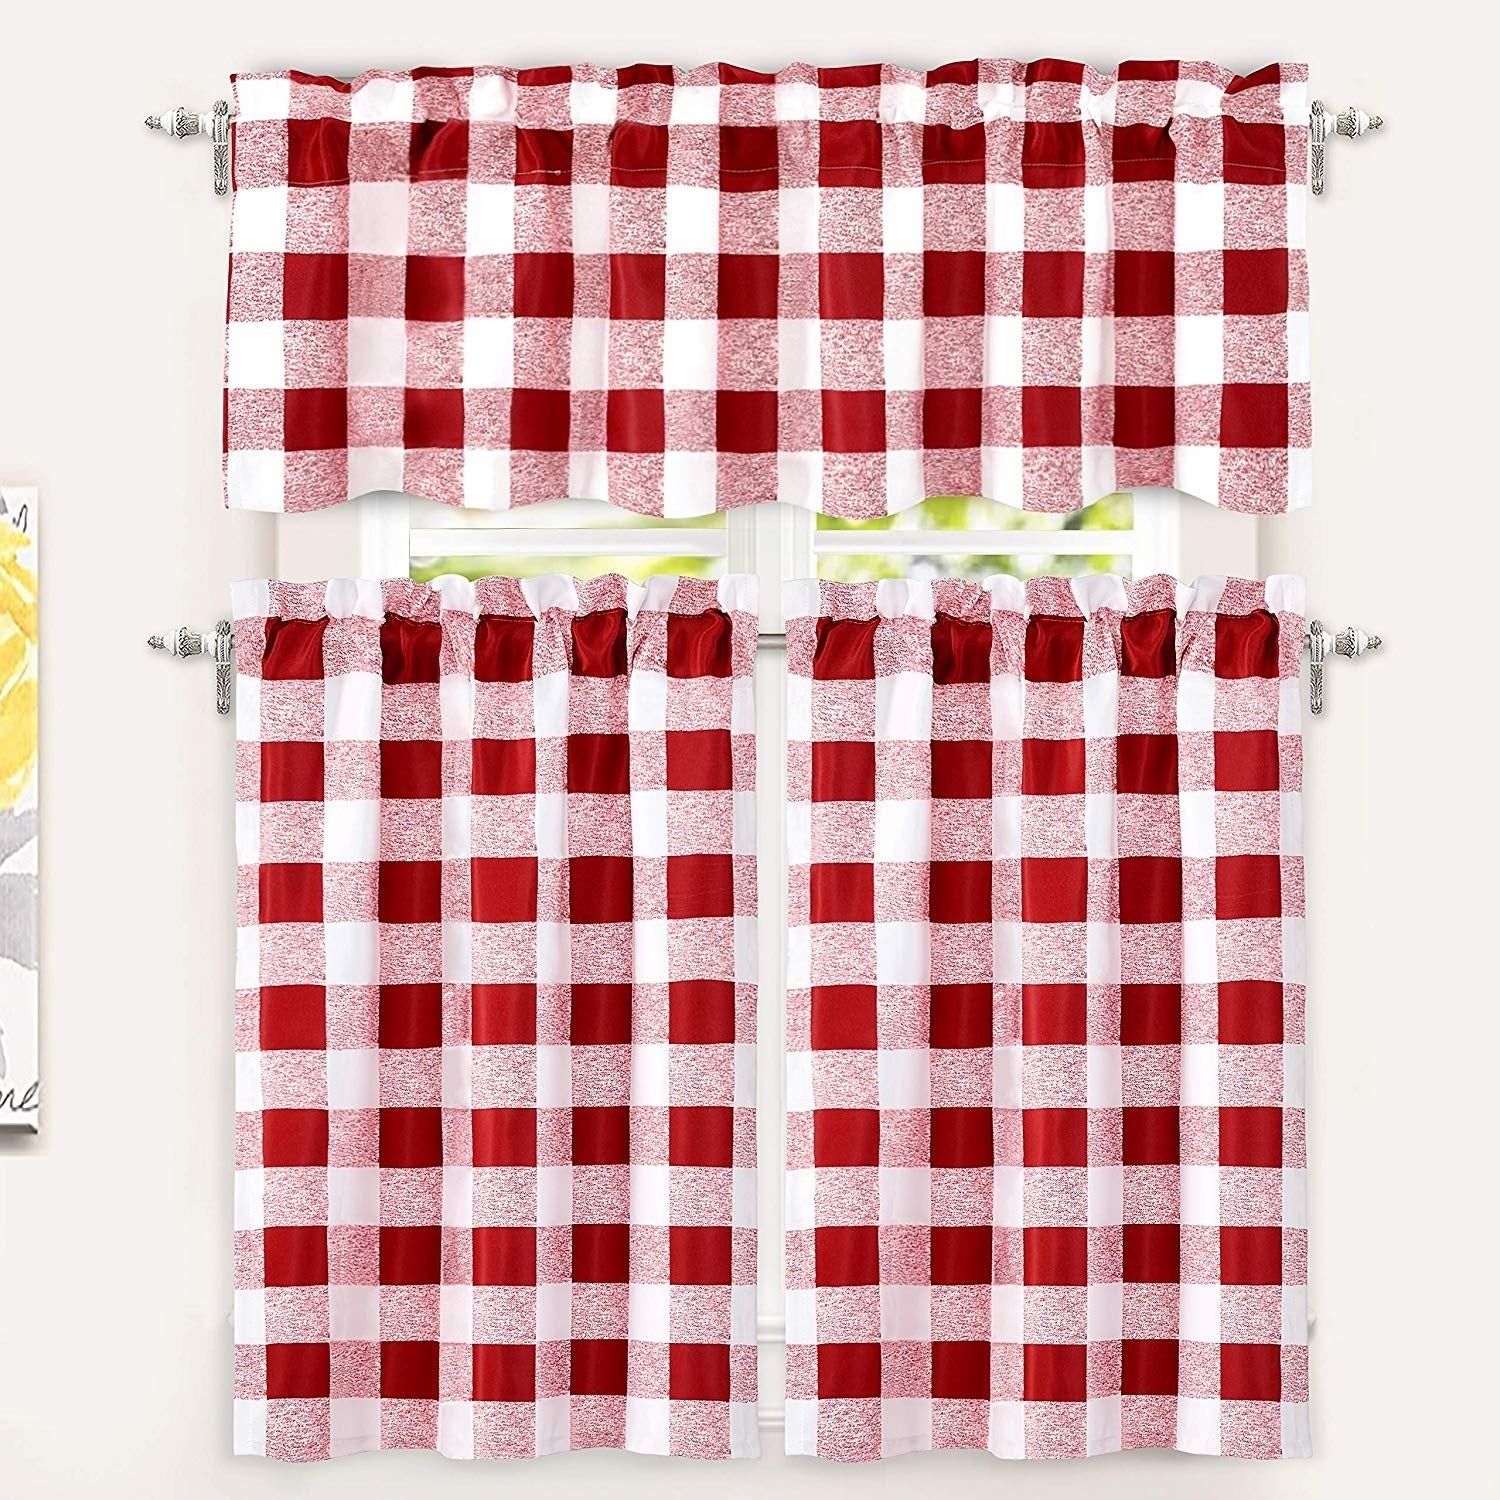 Driftaway Buffalo Checker Plaid 3 Piece Kitchen Curtain Valance And Tiers  Set Pertaining To Lodge Plaid 3 Piece Kitchen Curtain Tier And Valance Sets (View 6 of 20)